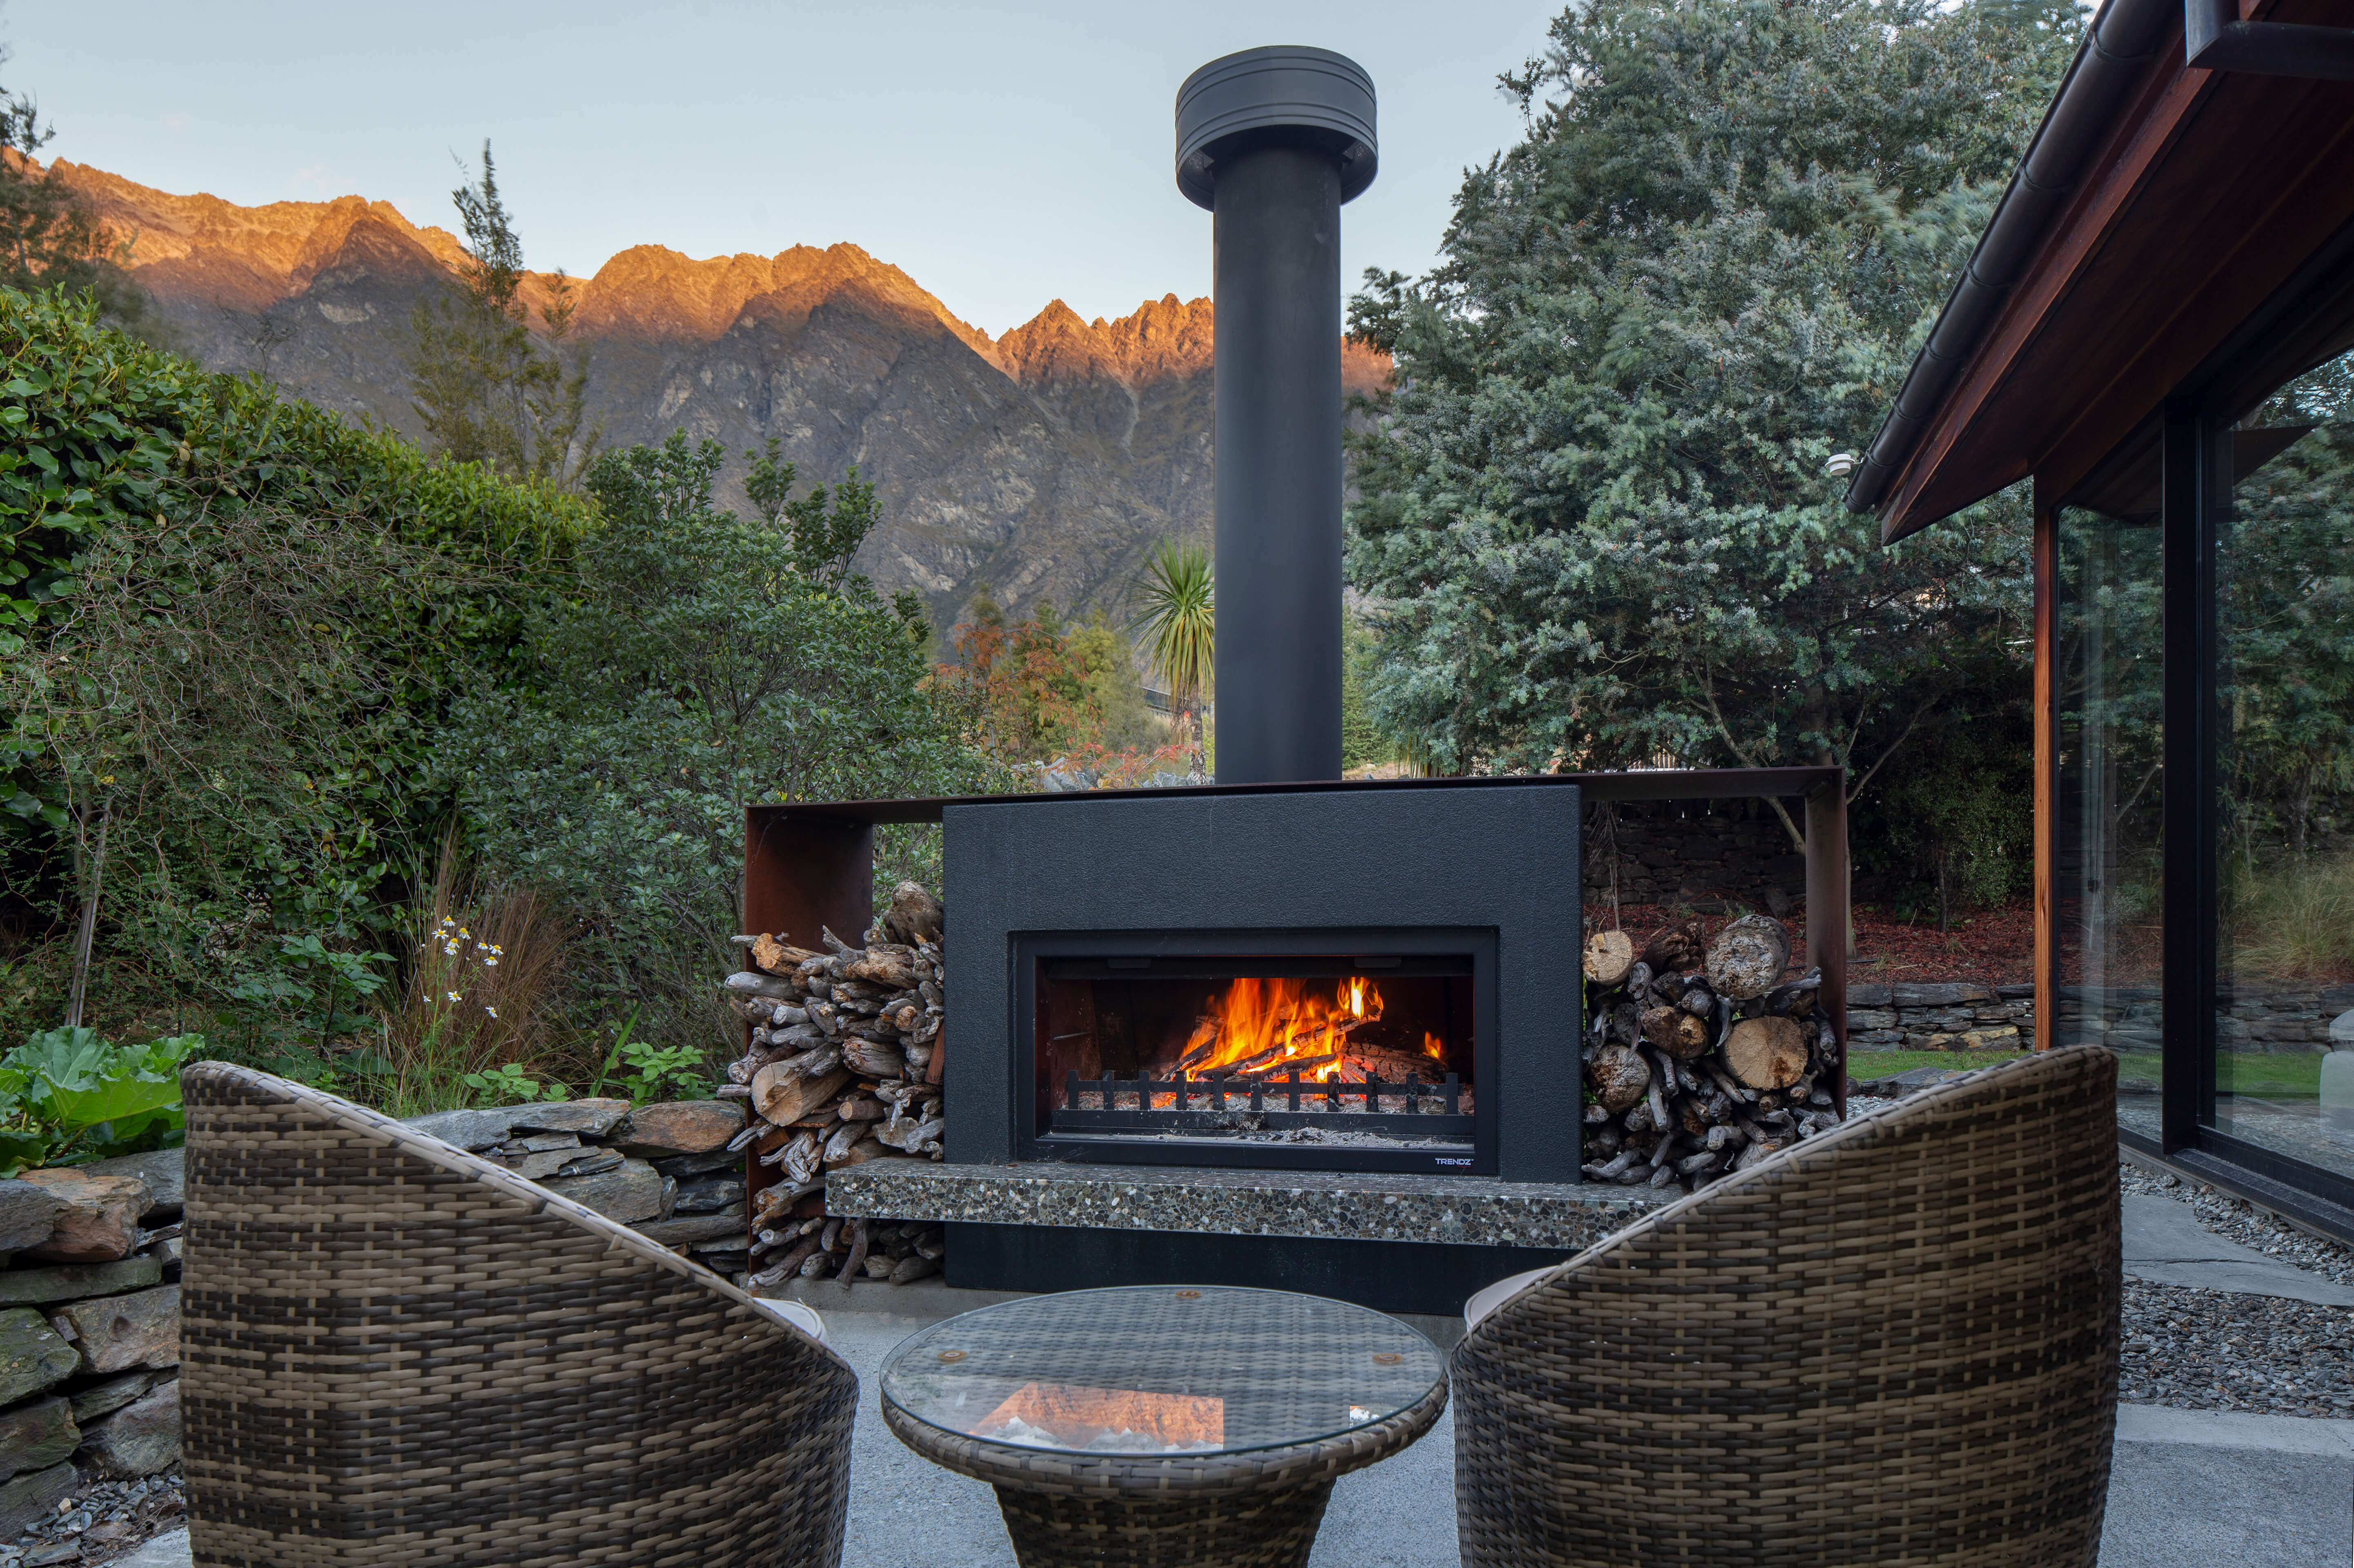 How to care for an outdoor fireplace